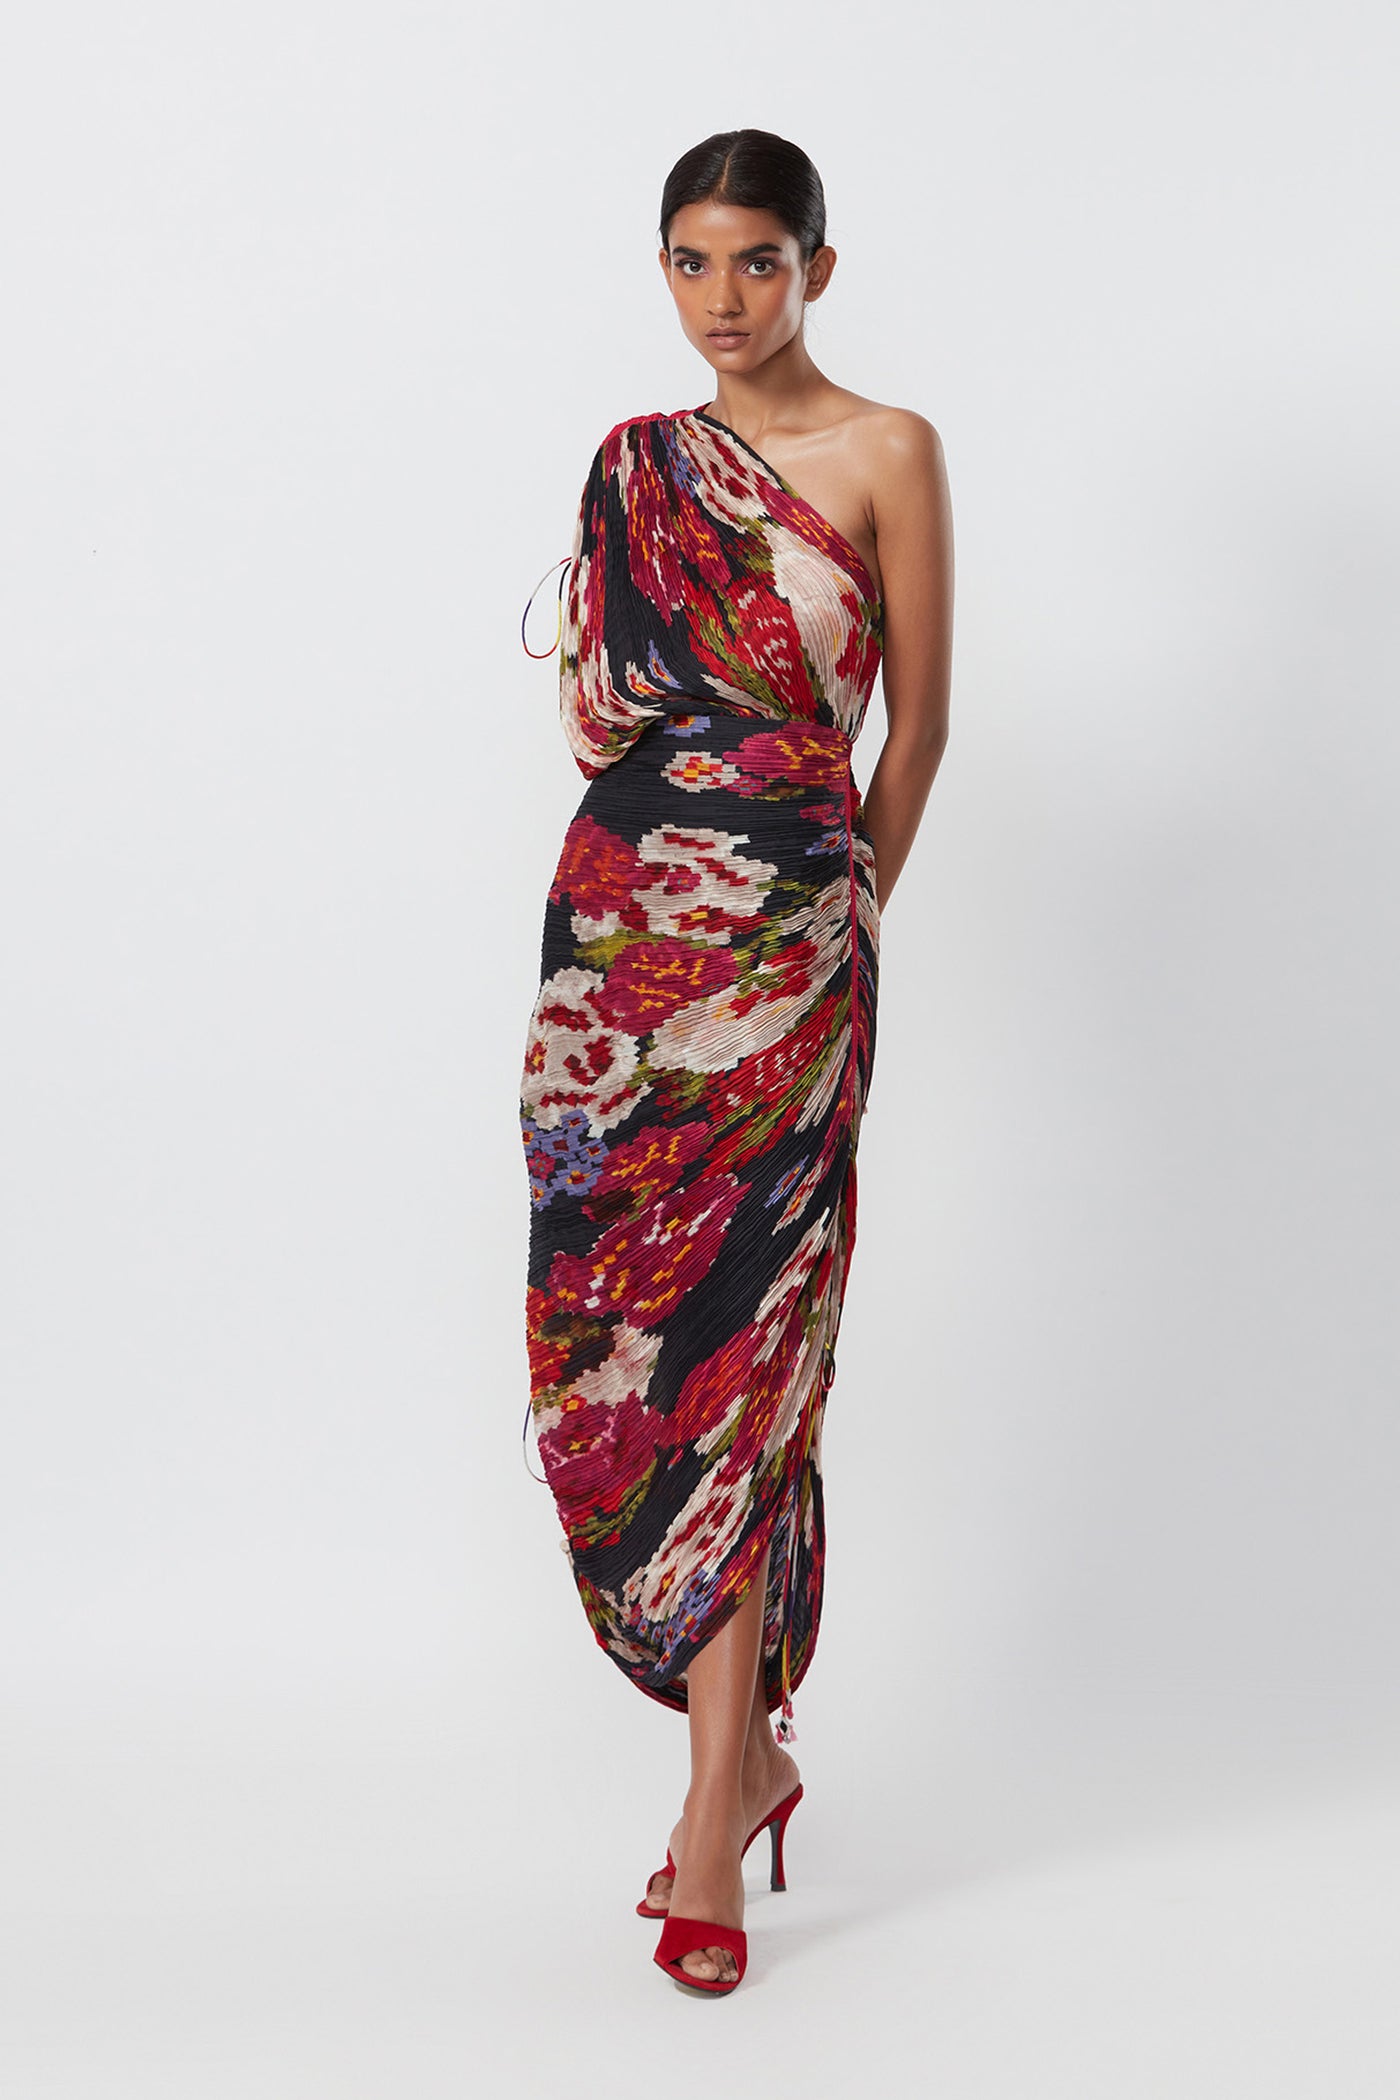 Saaksha and Kinni Abstract Floral Print, Hand Micro Pleated Sari Style Dress indian designer online shopping melange singapore